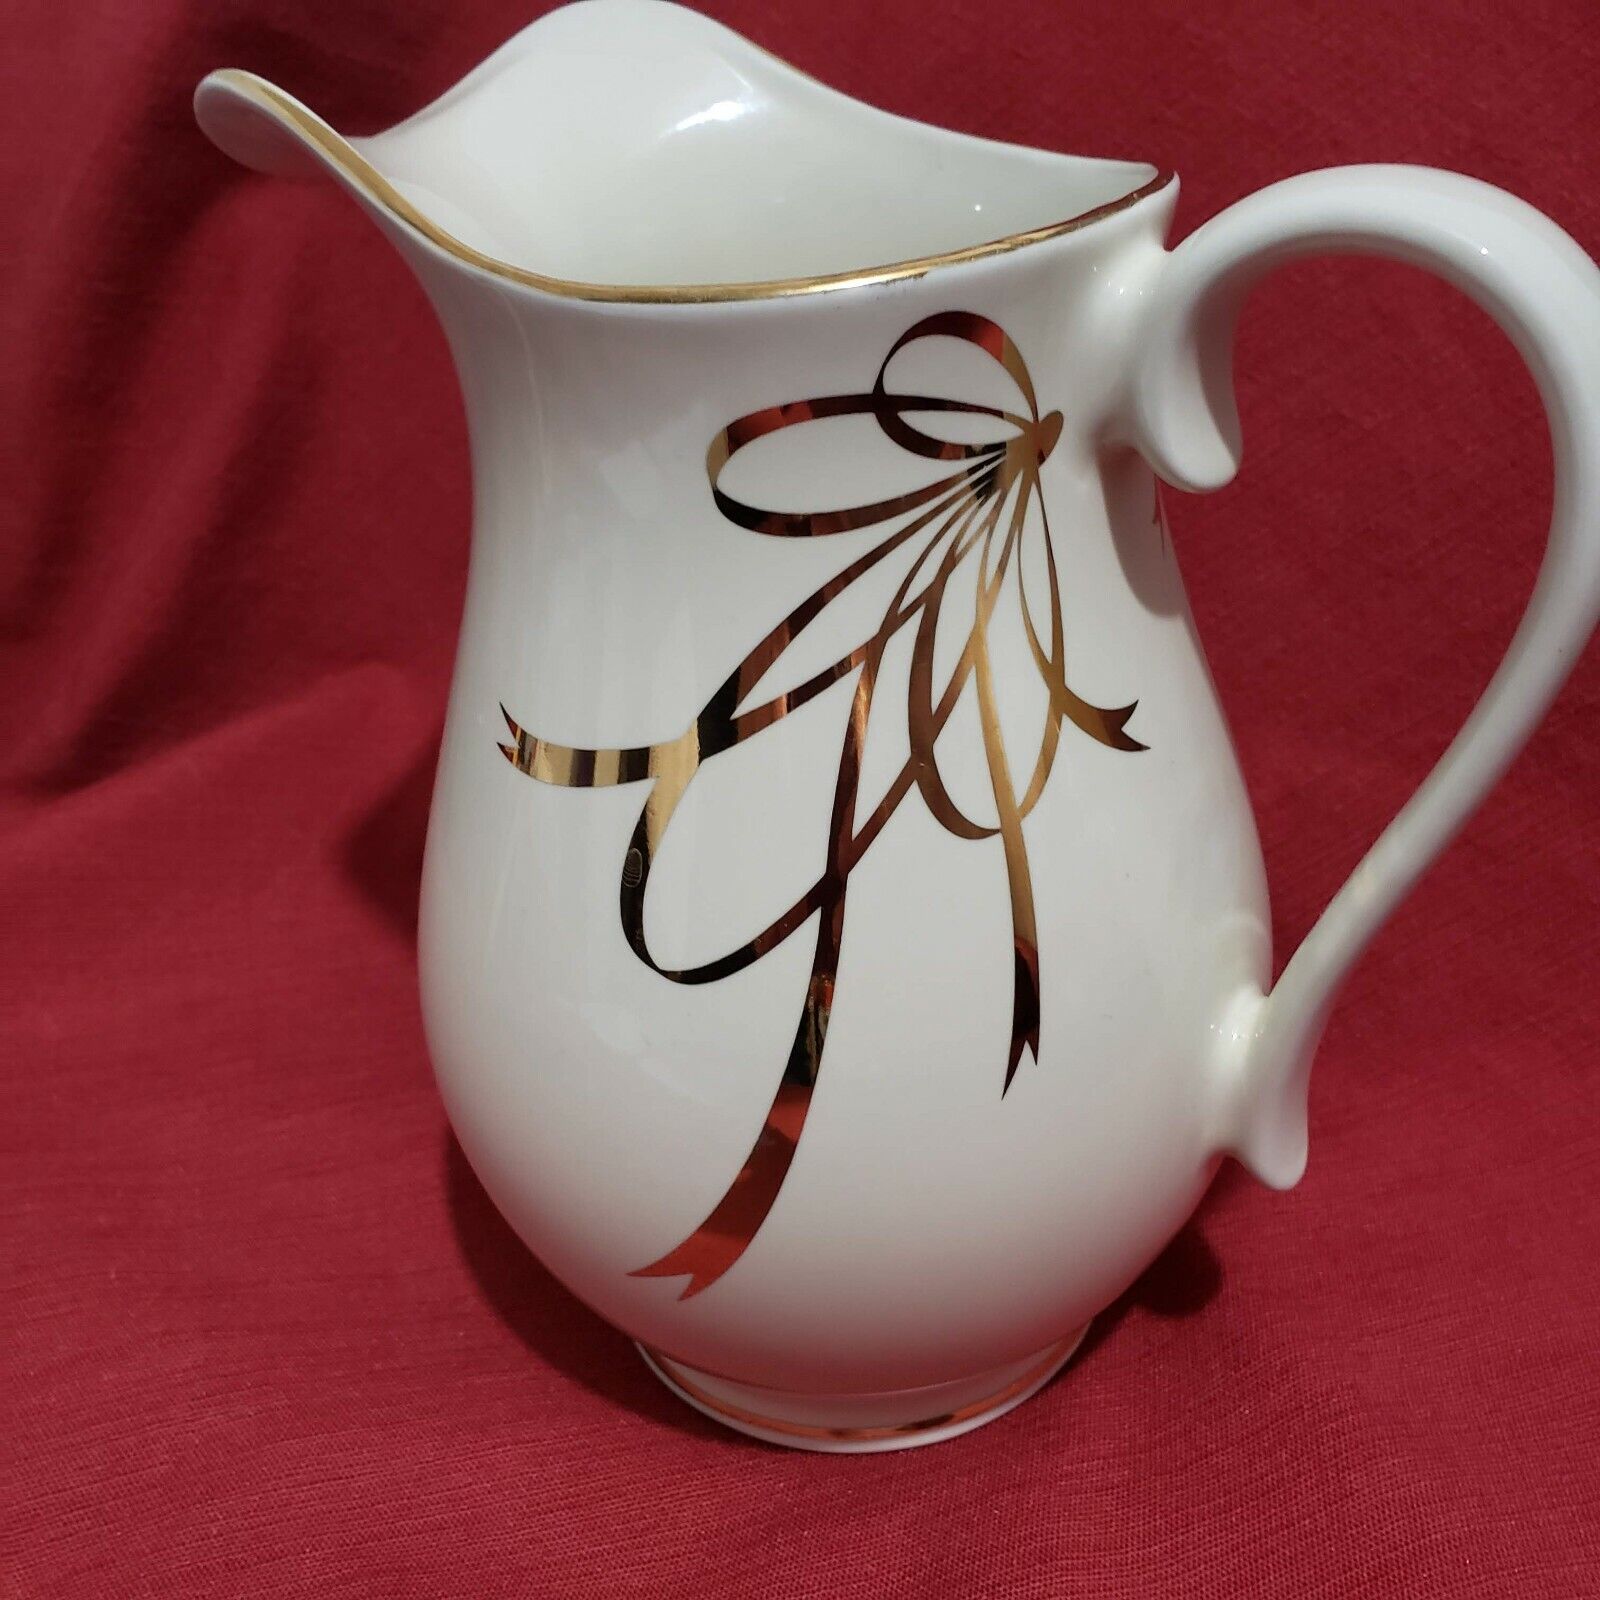  A Teleflora Gift Ivory with gold Trim pitcher 